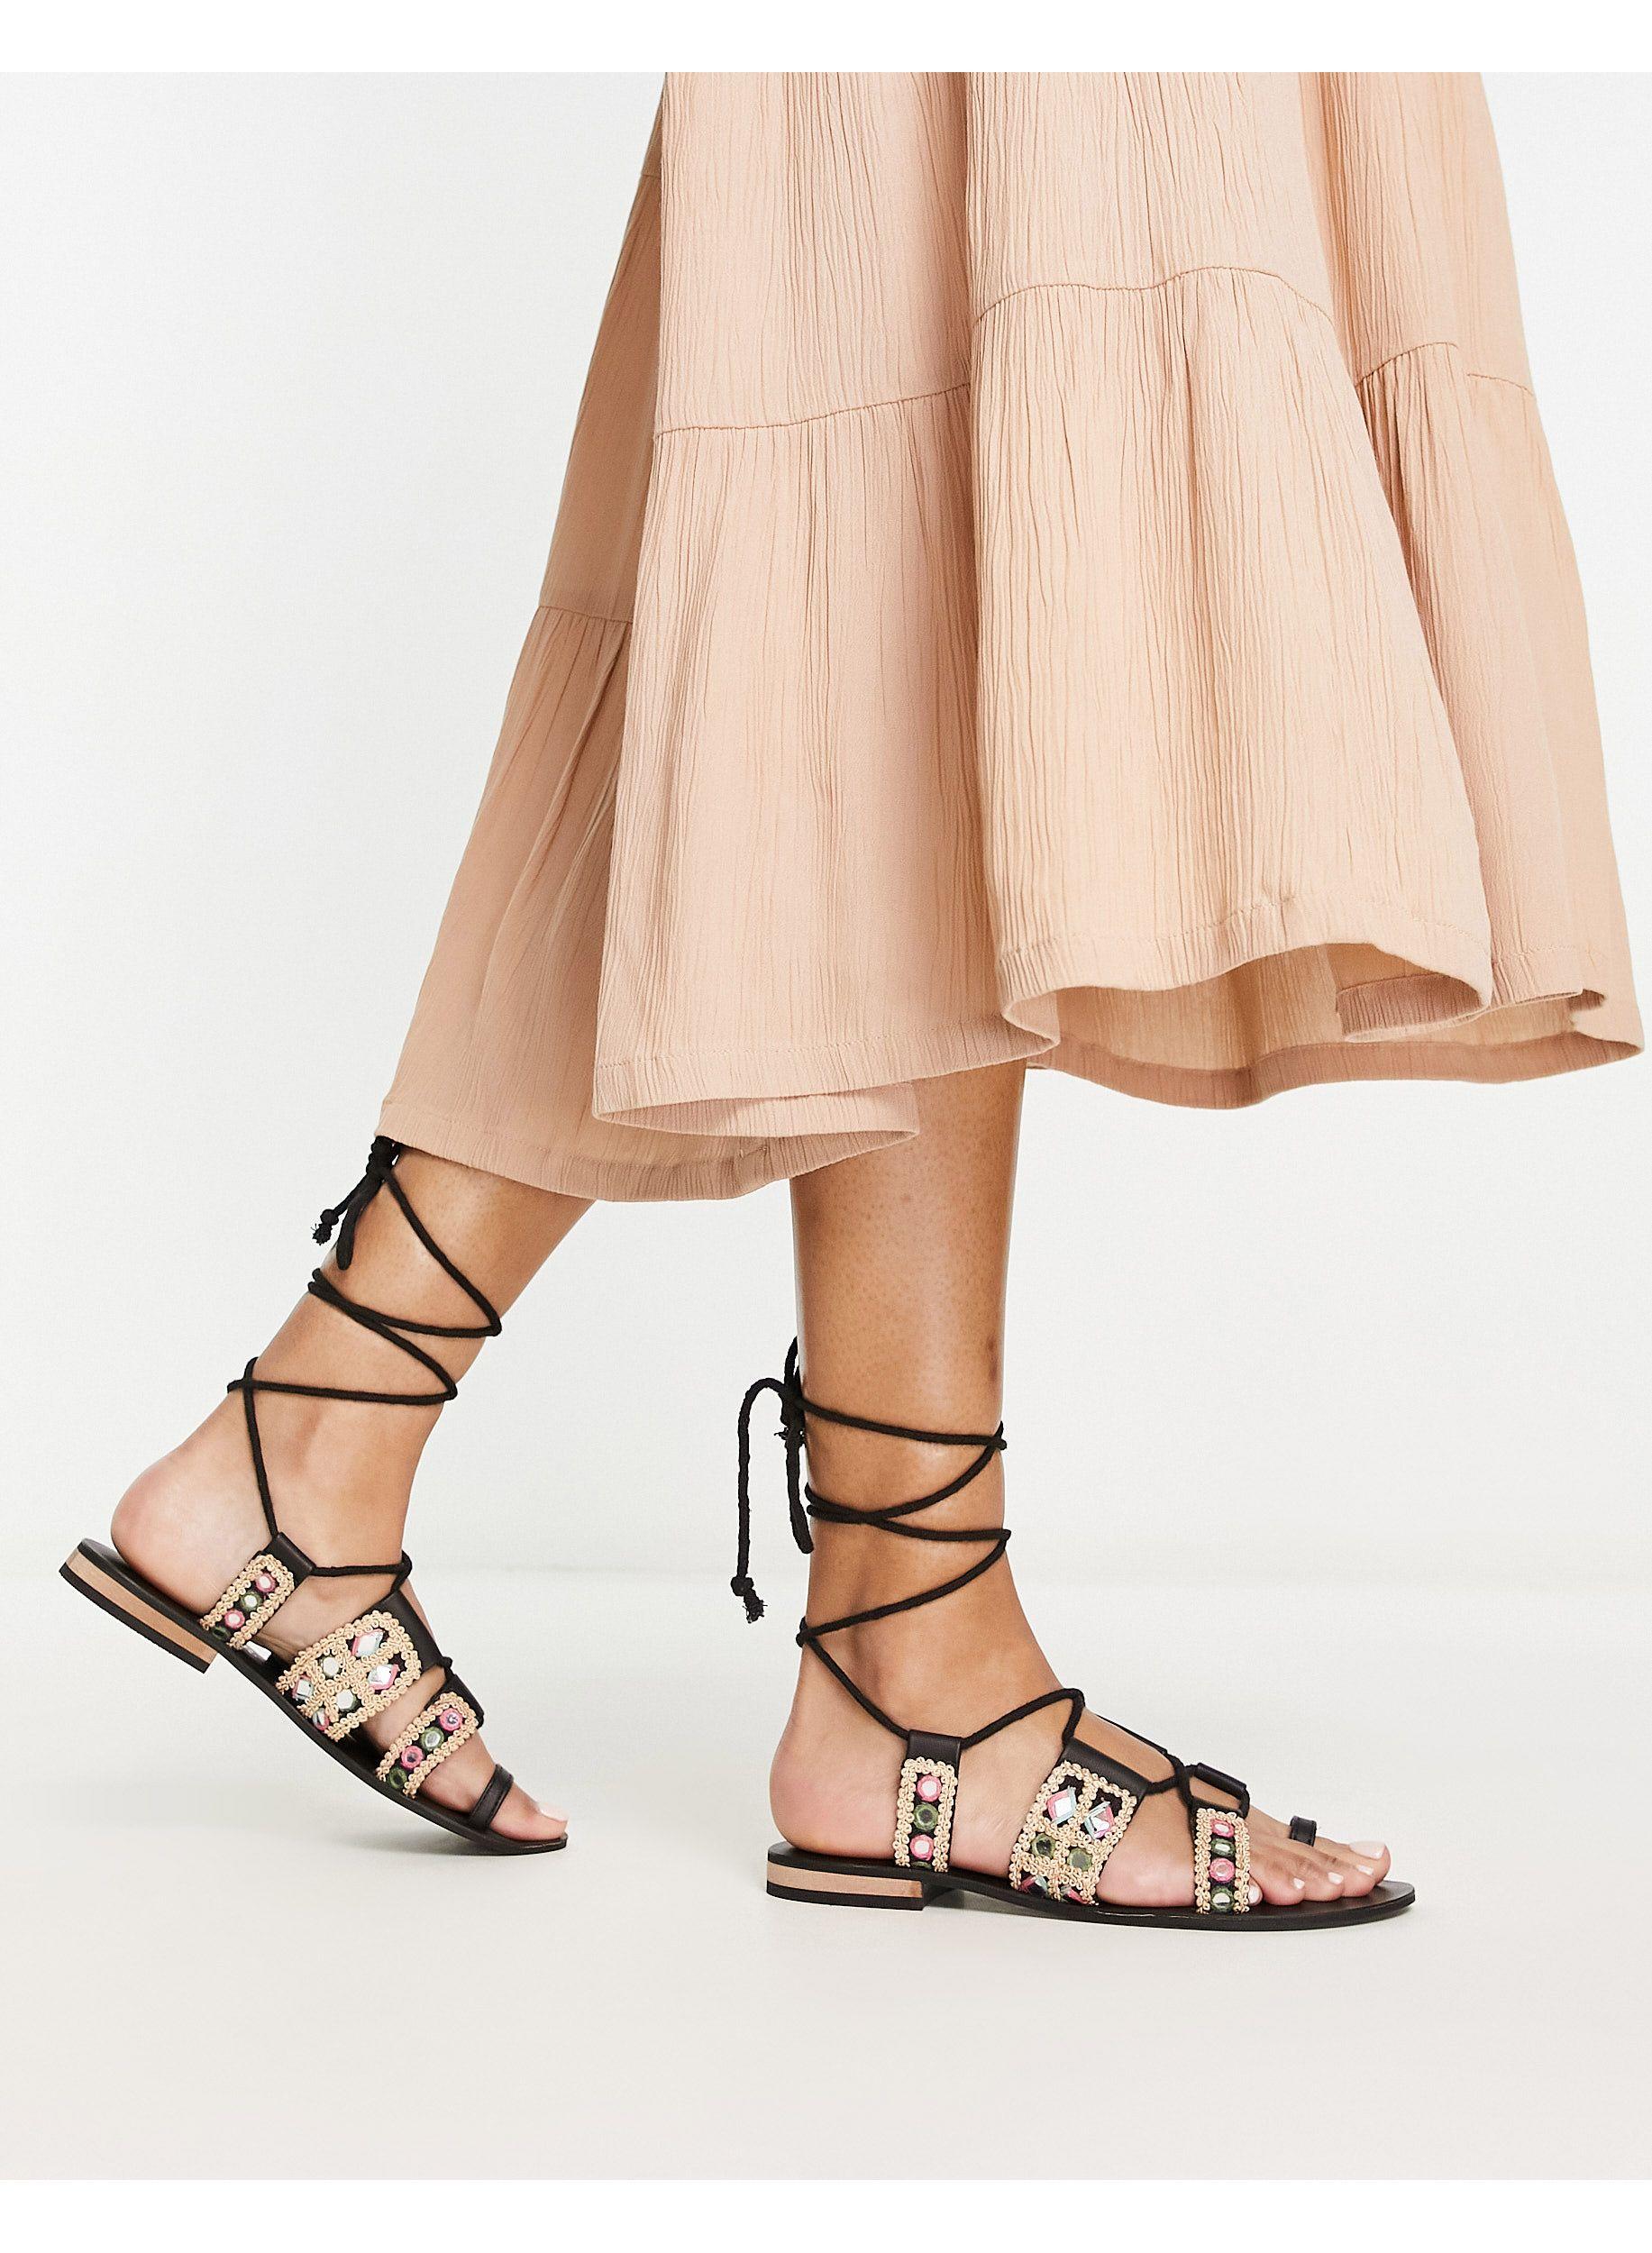 Free People Mantra Mirror Detail Gladiator Sandals in Natural | Lyst Canada